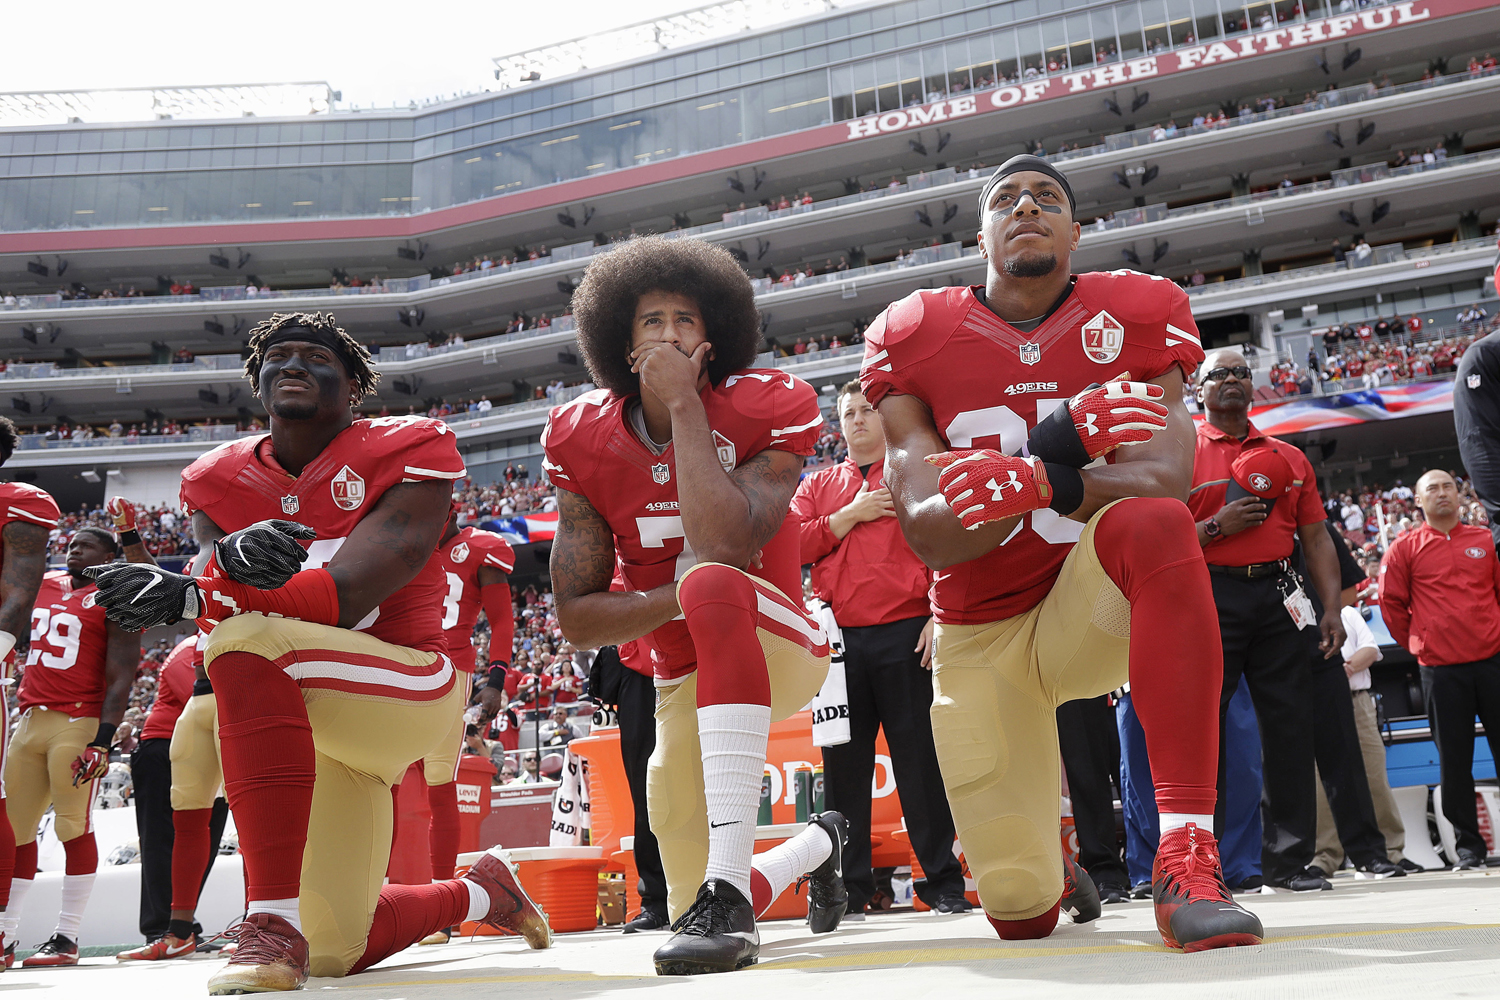 In this Oct. 2, 2016 file photo, from left, San Francisco 49ers outside linebacker Eli Harold, quarterback Colin Kaepernick and safety Eric Reid kneel in protest during the national anthem before an NFL football game against the Dallas Cowboys in Santa Clara, Calif. (Marcio Jose Sanchez, AP)